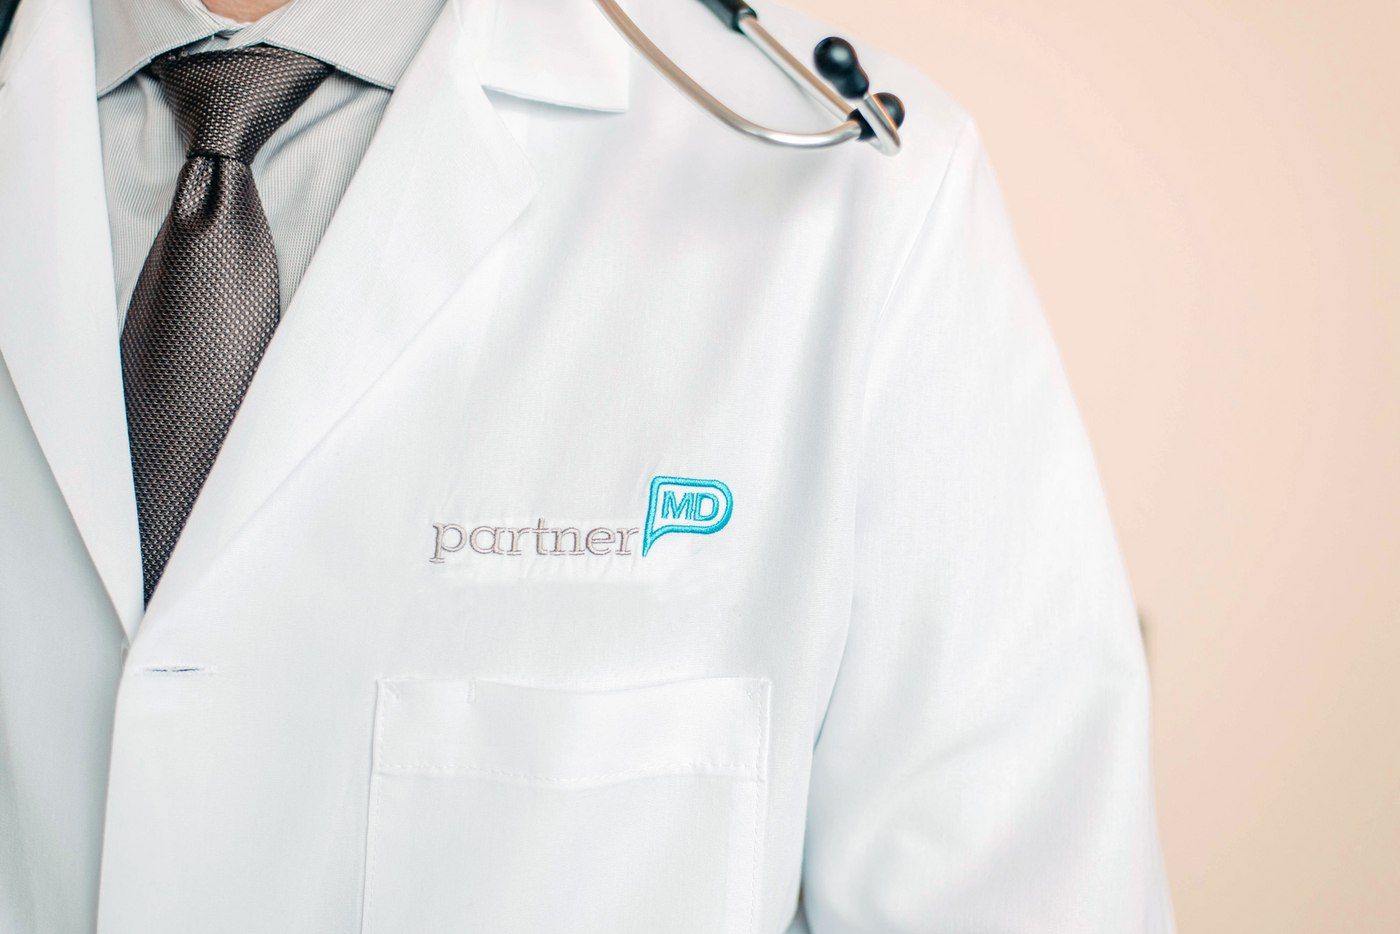 PartnerMD physician in a white coat